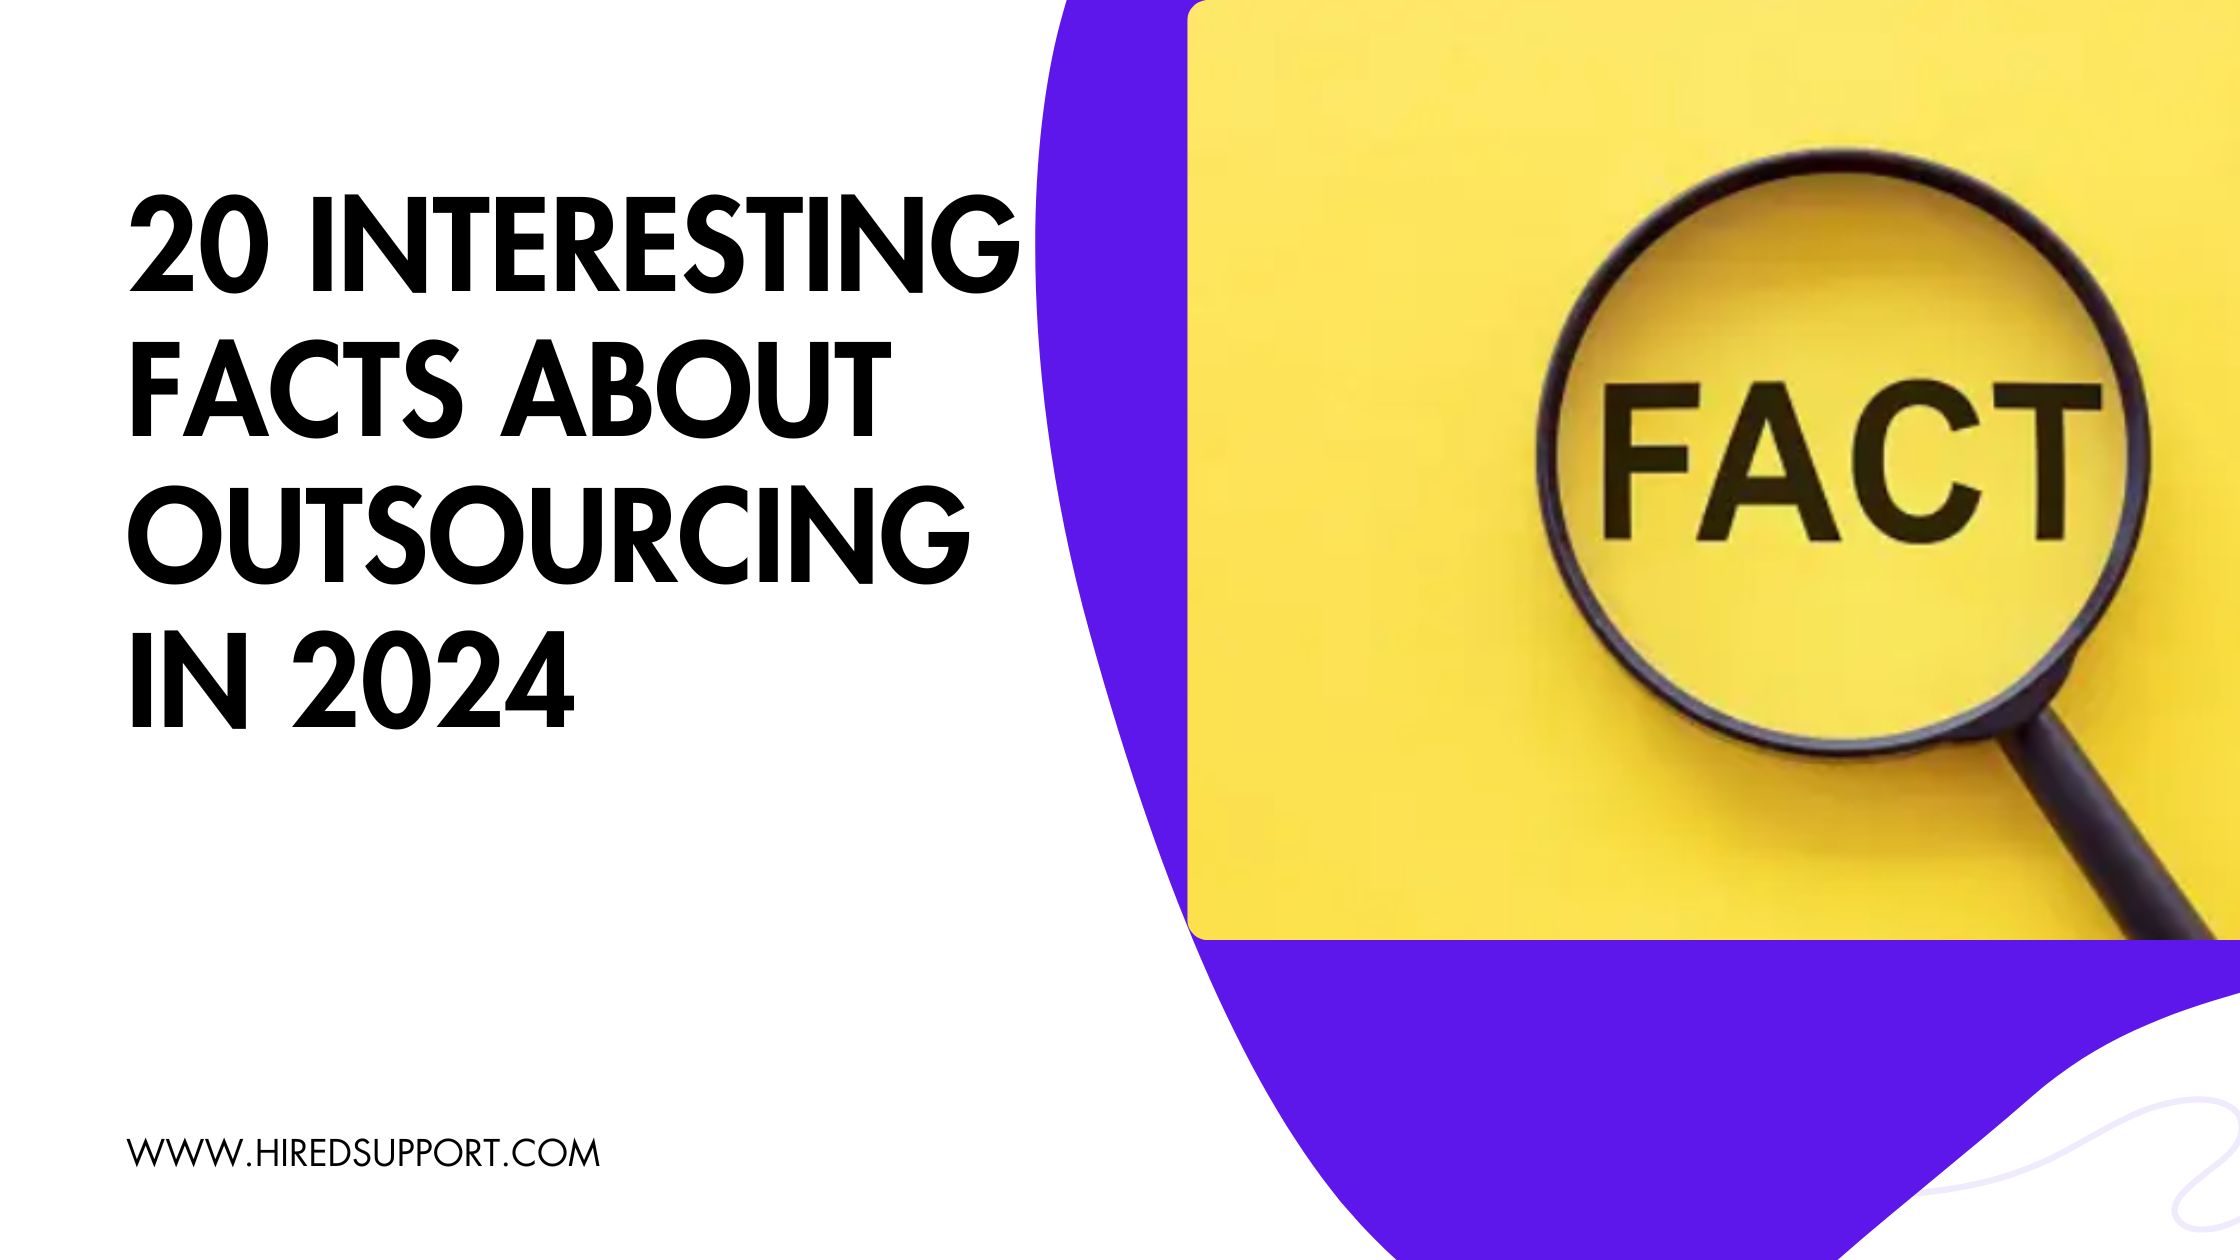 20 Interesting Facts about Outsourcing